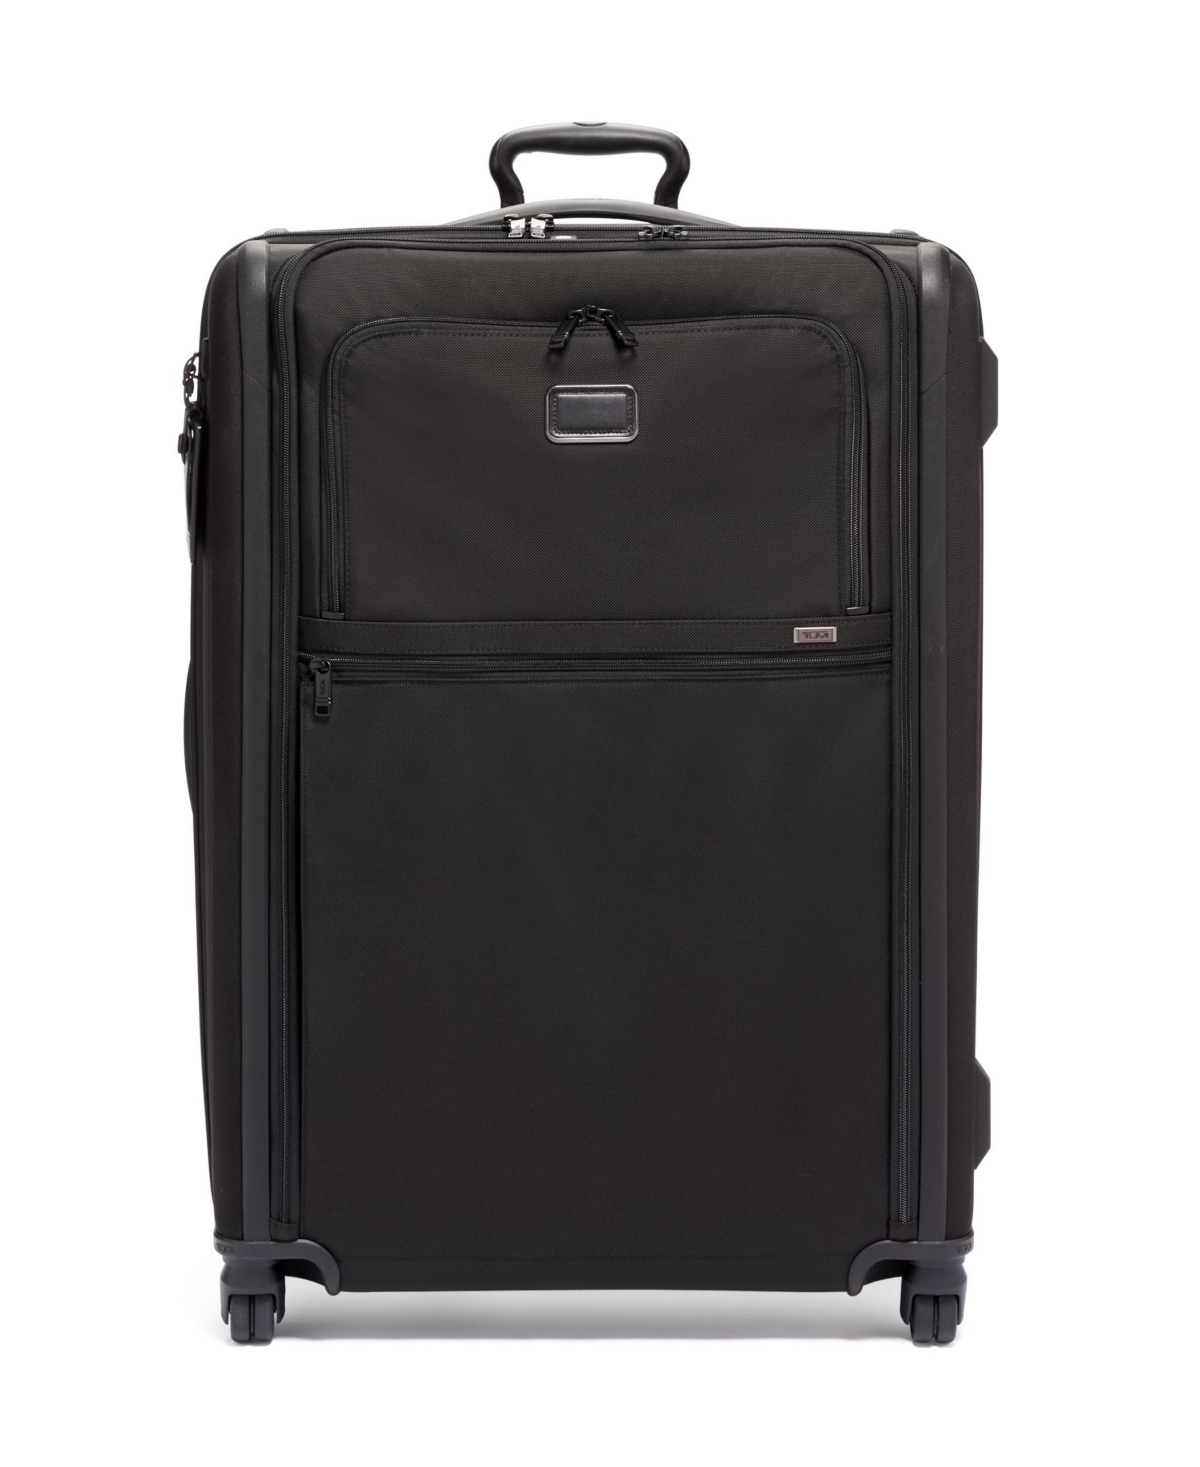 Tumi Alpha 3 Collection 31-Inch Extended Trip Expandable 4-Wheel Packing Case in Black at Nordstrom